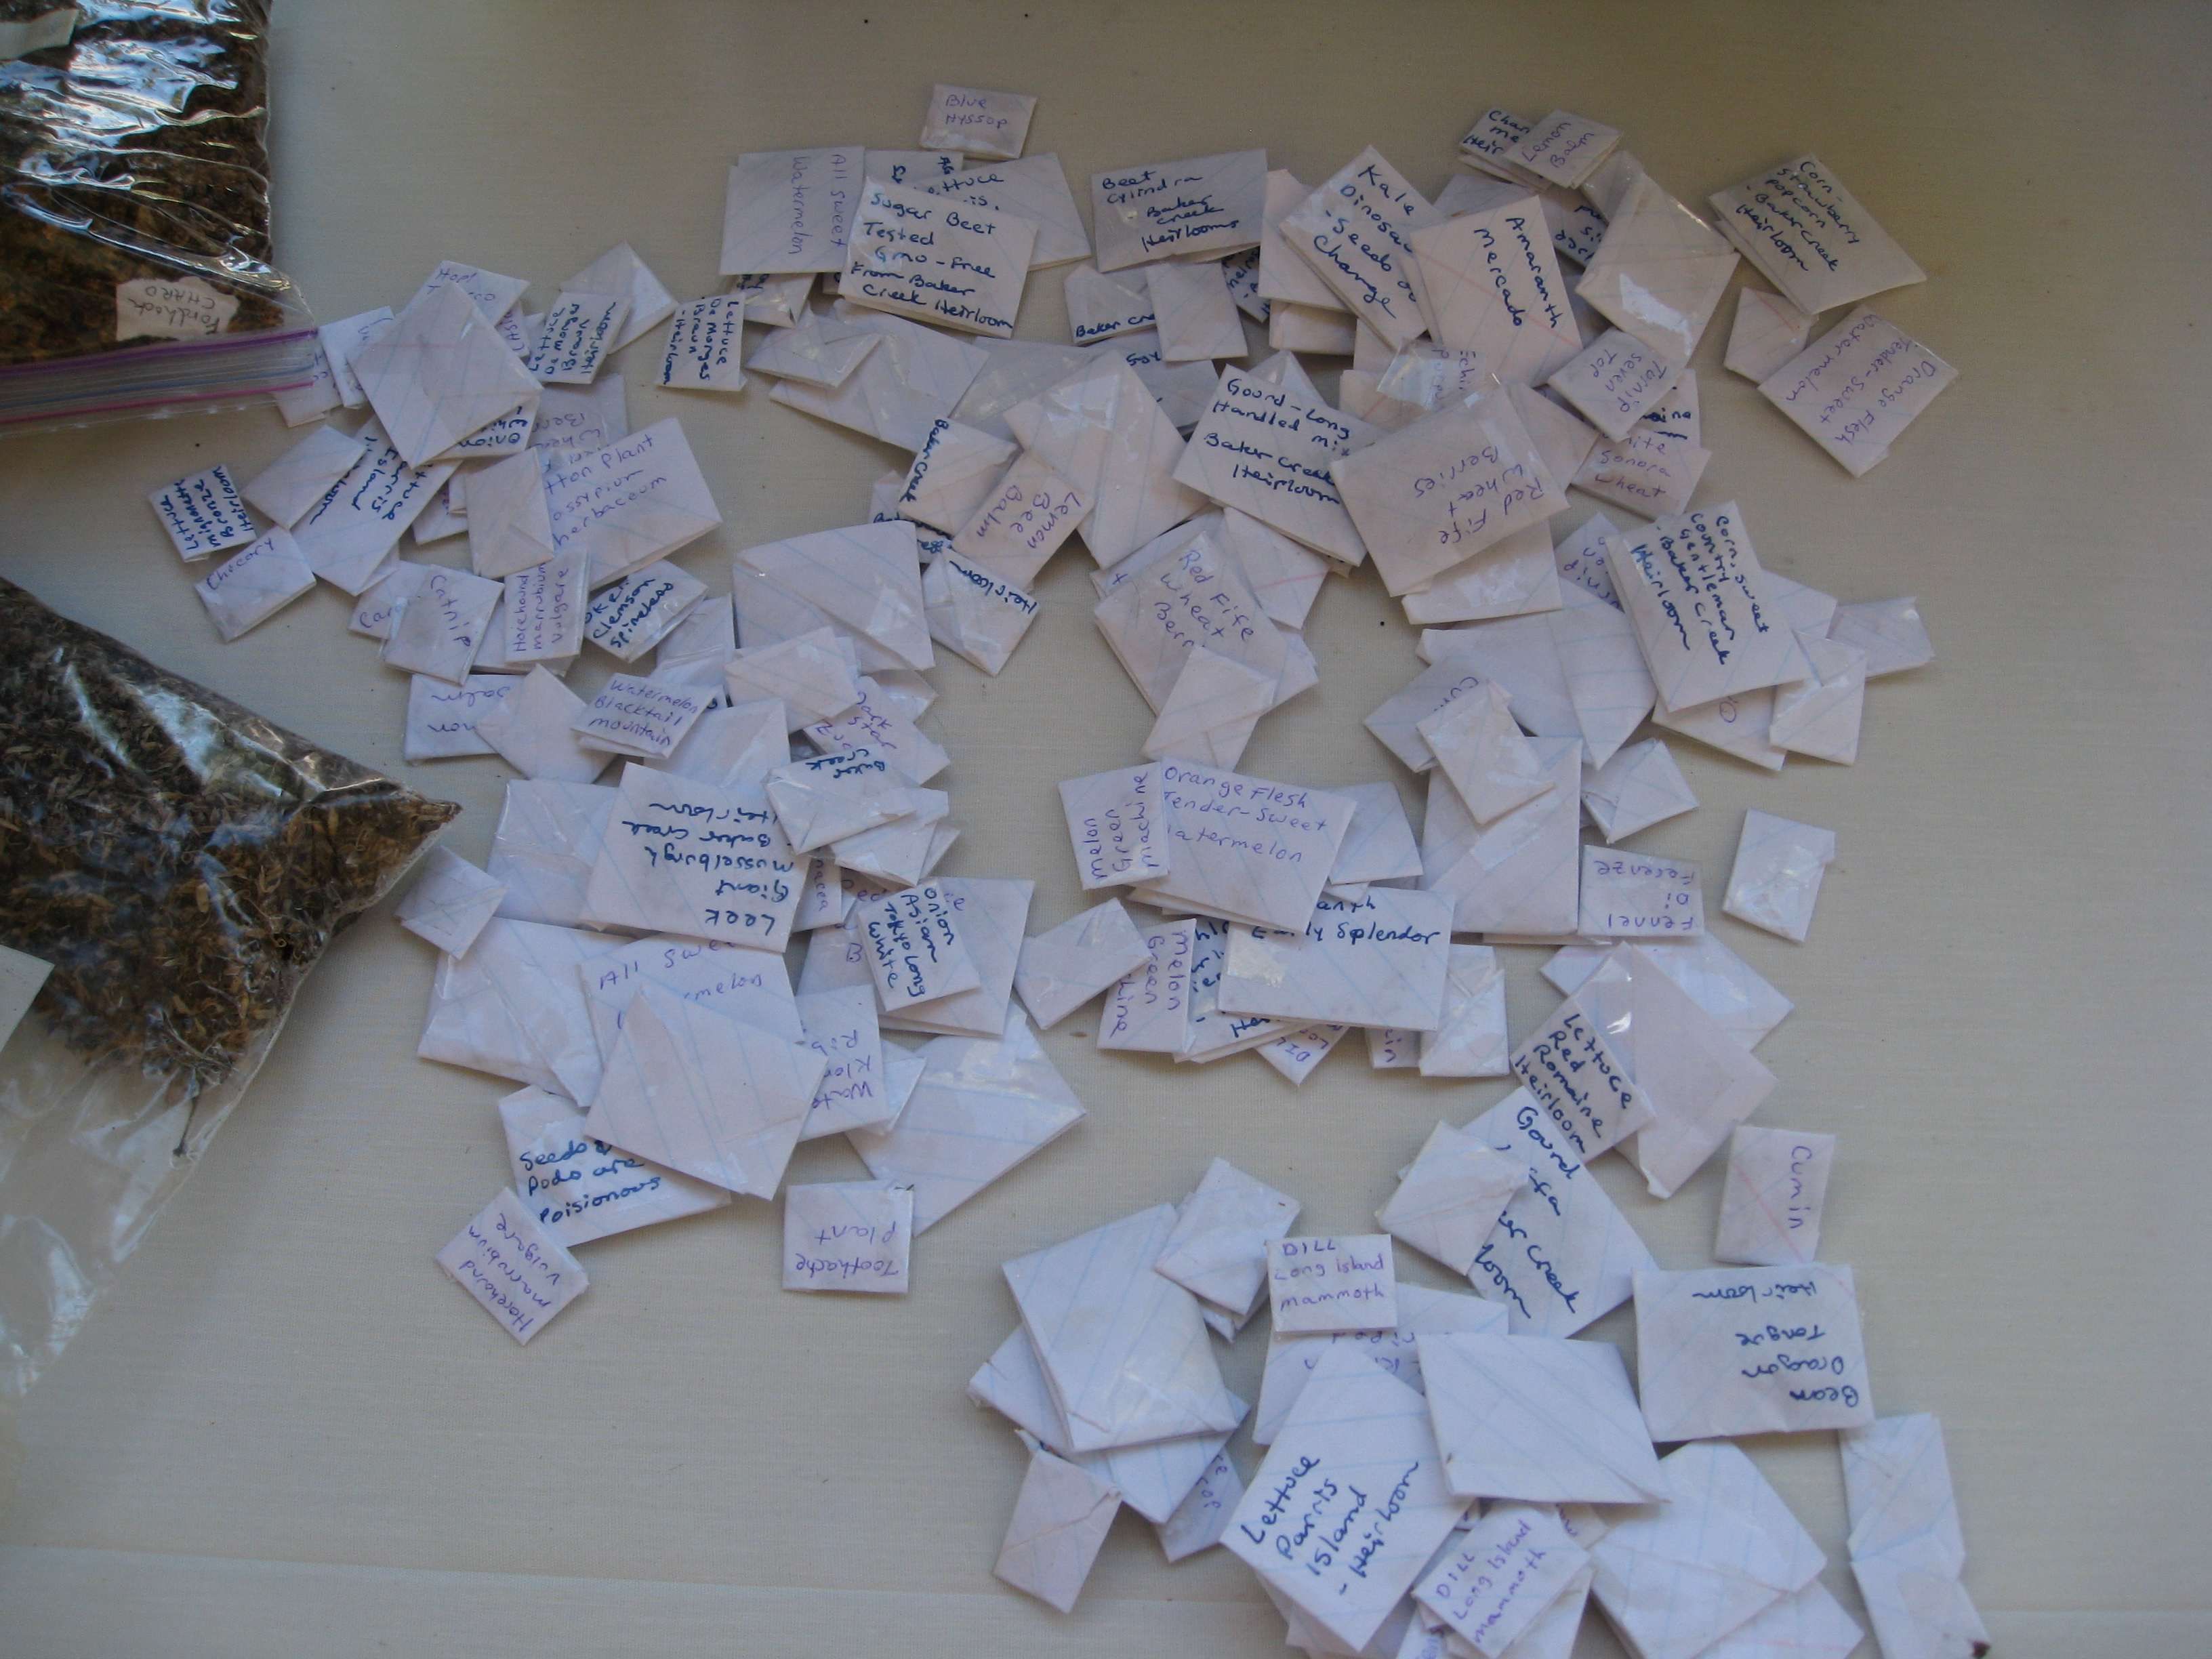 One woman went all out and labeled over 100 different varieties of seeds from her garden. 